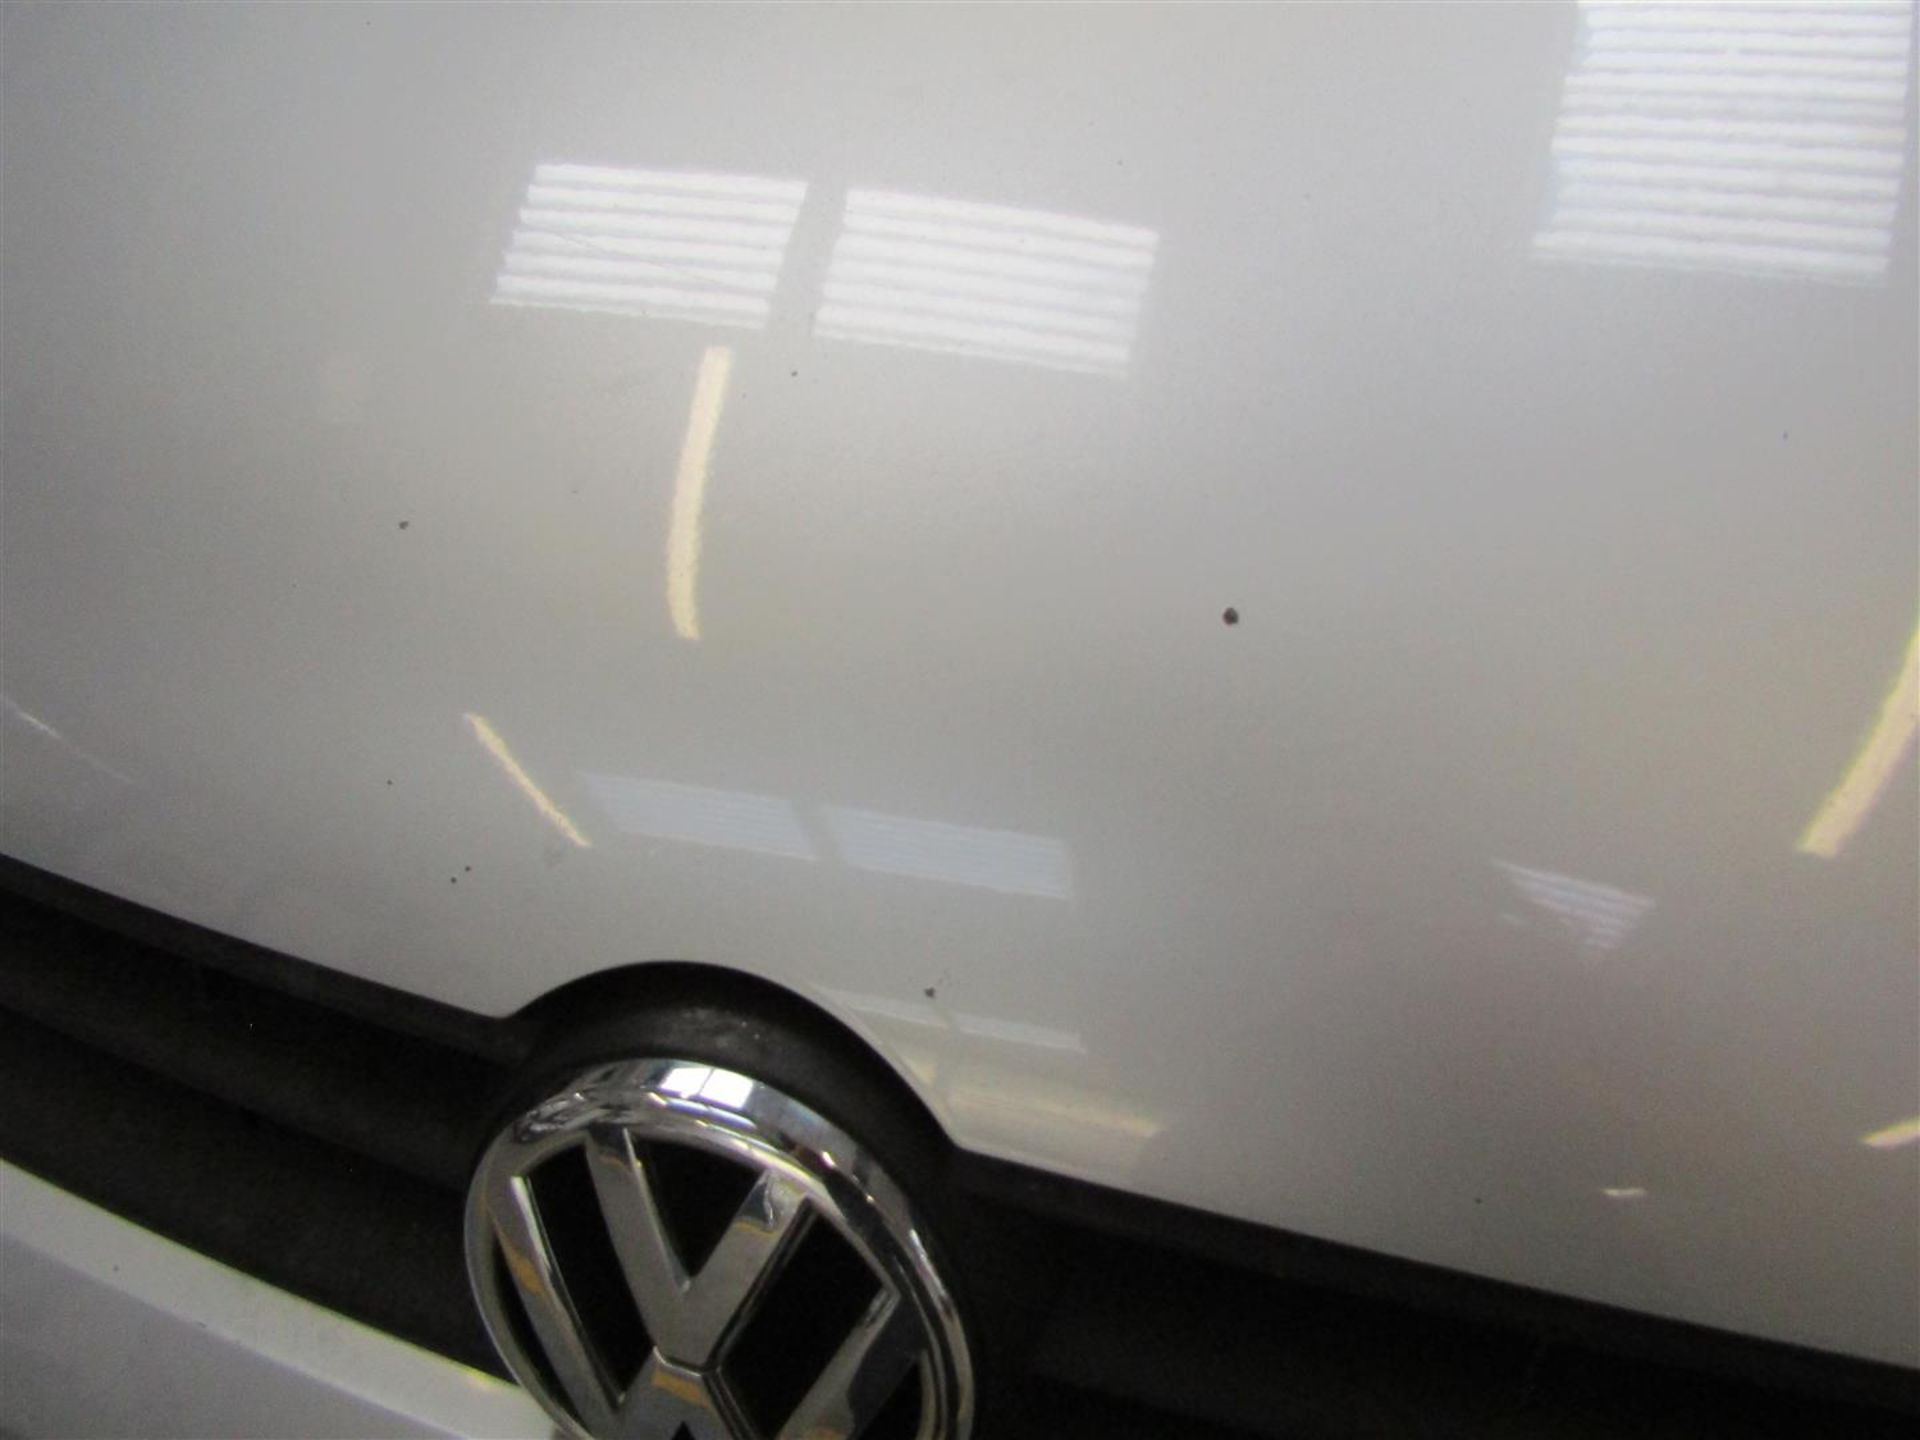 59 10 VW Polo S 60 - Image 7 of 29